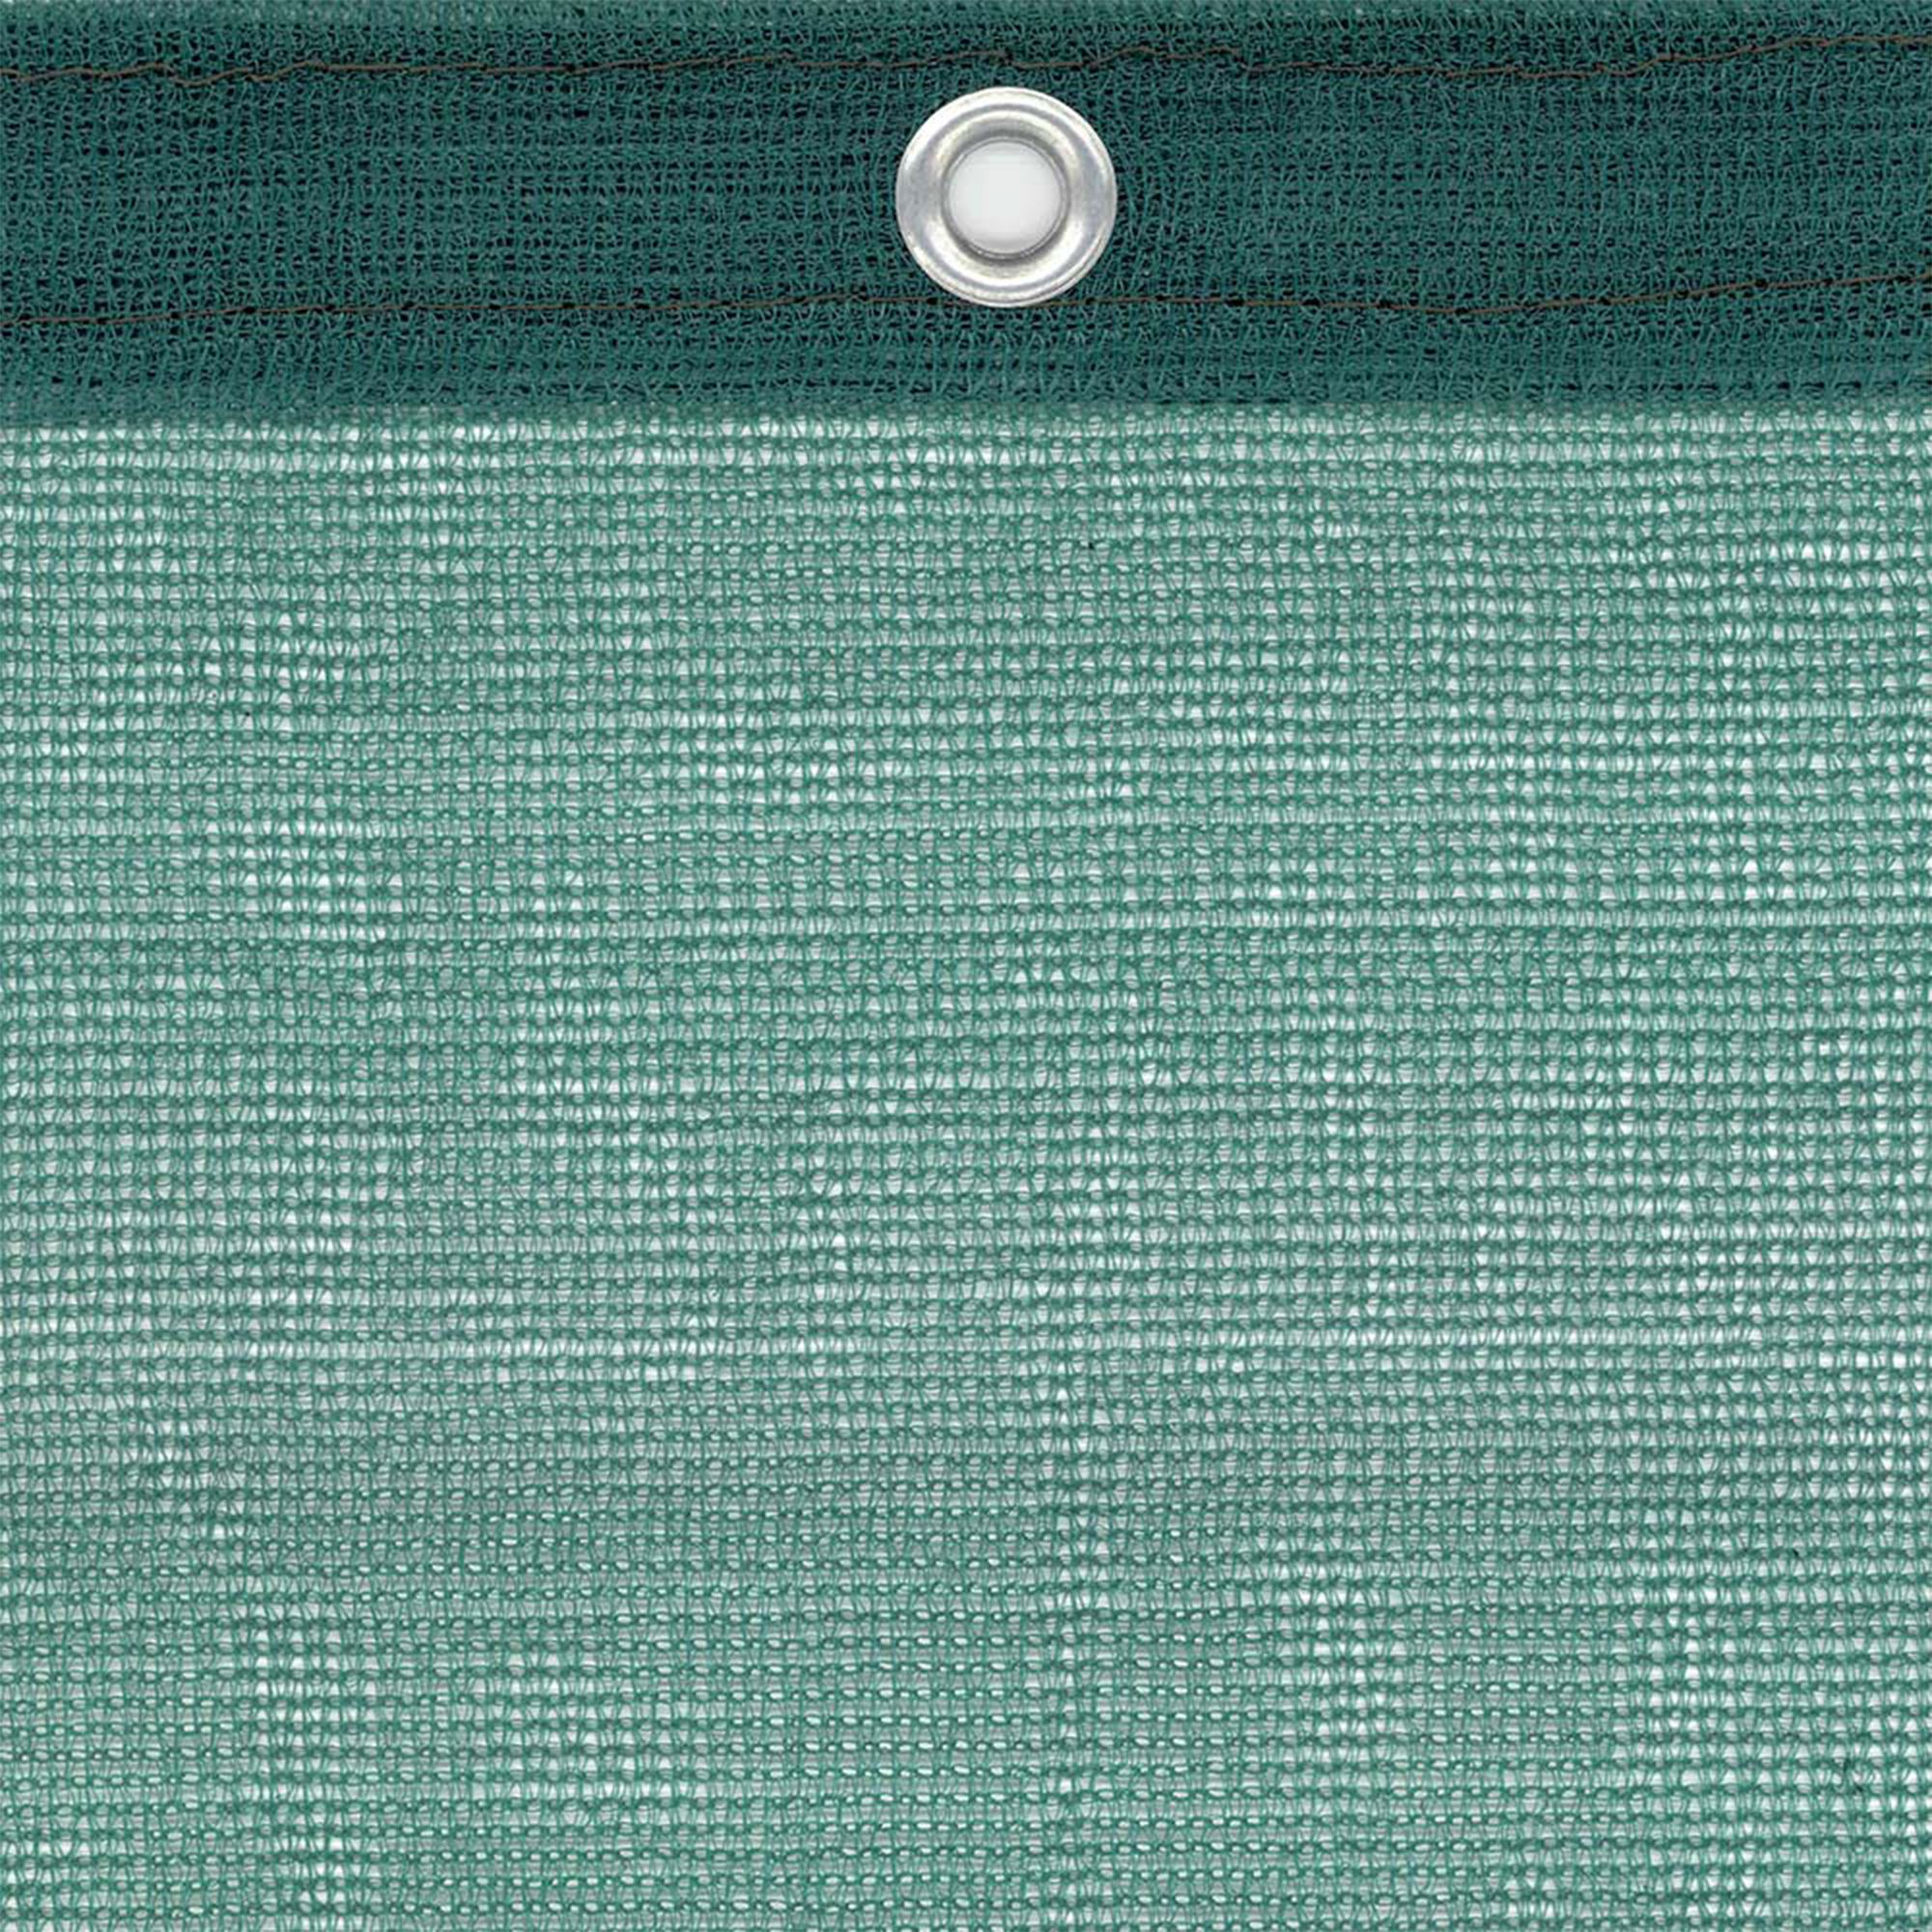 Tenax HDPE Lightweight Tear Resistant Privacy Screen, 7.8x150ft, Green - image 2 of 3